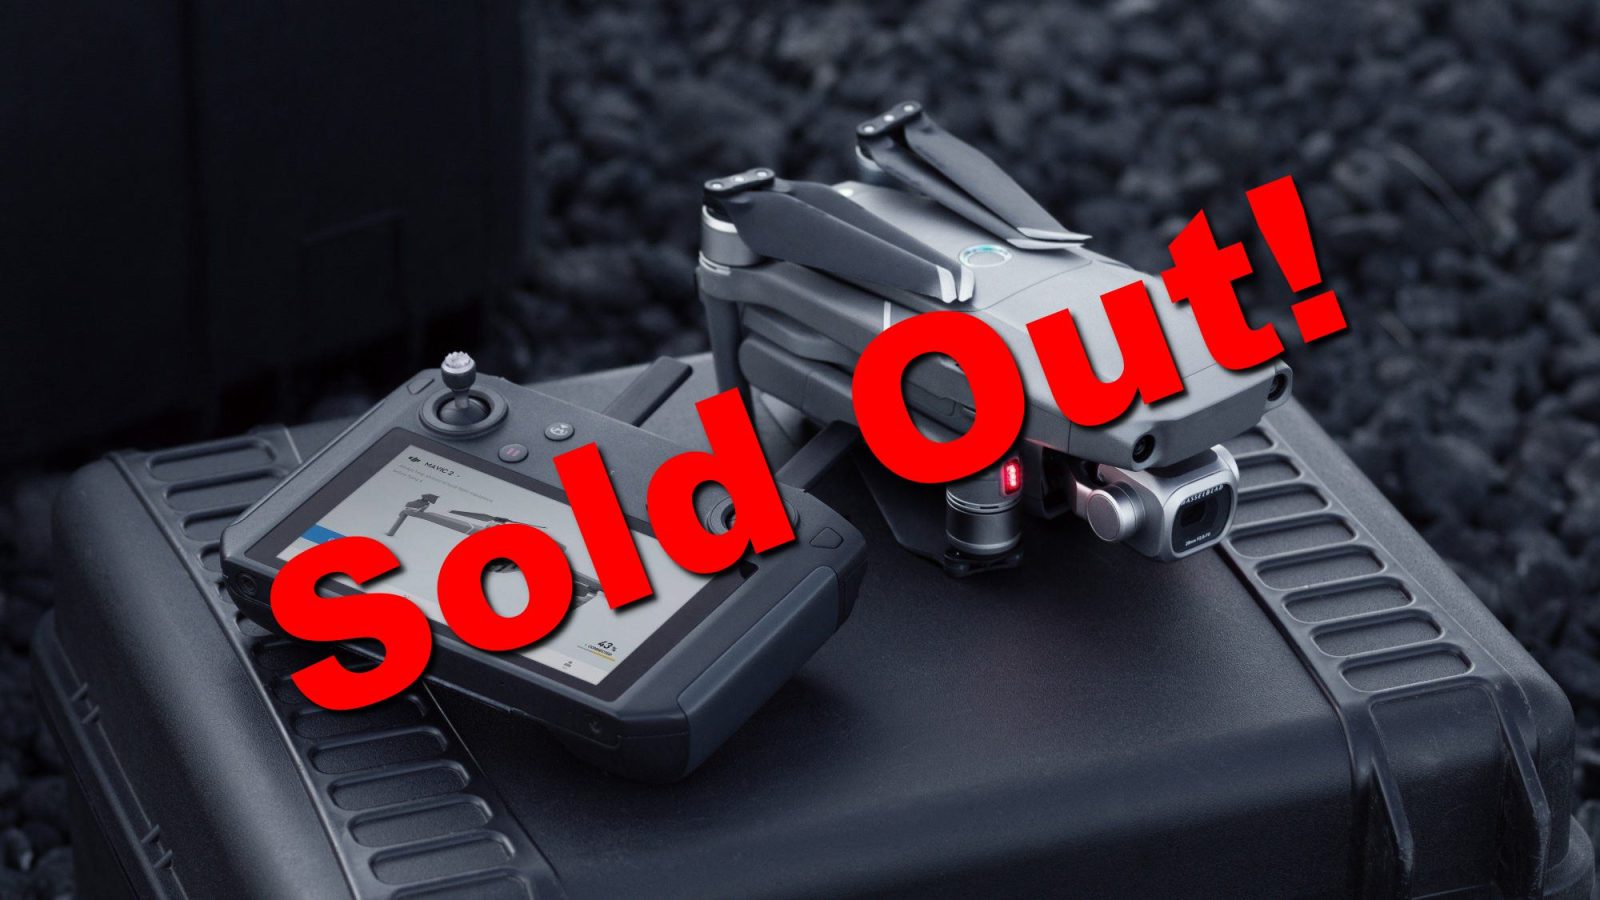 DJI Smart Controller Sells Out